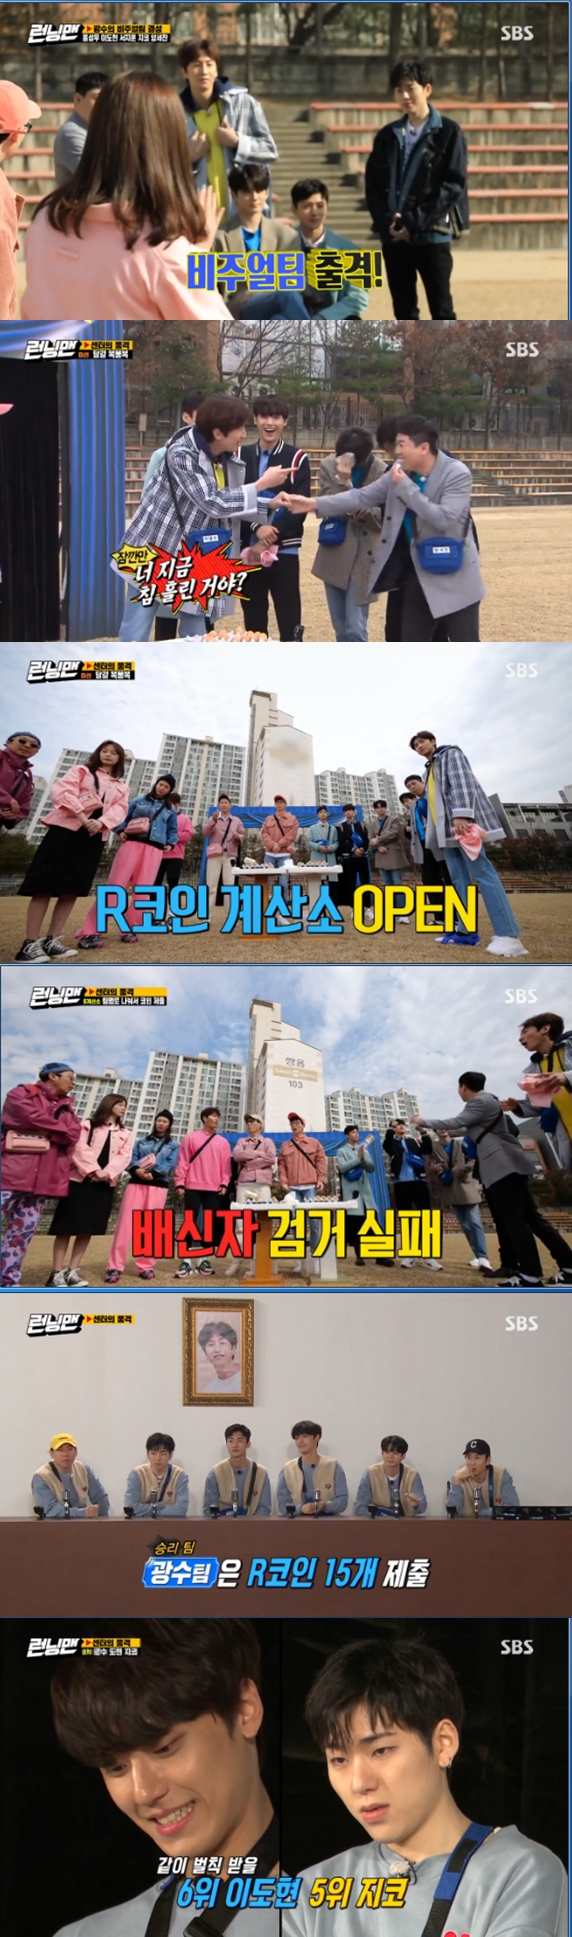 Zico and Lee Do-hyun have been besieged as Lee Kwang-soo.In the SBS entertainment program Running Man broadcasted on the night of the 29th, Zico, Lee Do-hyun, Seo Ji-hoon and Ong Sung Woo came out as guests and performed class of center race with members.Yang Se-chan and Lee Kwang-soo were called separately by the production team and were waiting in the waiting room.Yang Se-chan began to worry, There are some people among the guest who overlap fashion with me.Lee Kwang-soo said, I do not know yet.However, the guest who overlaps fashion with Yang Se-chan was Ong Sung-woo, and Yang Se-chan, who confirmed it, did not reach him.Lee Kwang-soo greeted guests and deliberately got Ong Sung-woo to sit next to Yang Se-chan.Yang Se-chan hit his hand and laughed, saying, Im going home.Ong Sung-woo compared his clothes with Yang Se-chan one by one and gave Yang Se-chan a greater humiliation.The crew told Lee Kwang-soo and Yang Se-chan that they had become a visual team with the Gess; the visual team formed a team and headed to where the members were.Yoo Jae-Suk introduced Zico and showed himself a no song dance; members teased him, saying, Is this a namola family? in the clumsy Yoo Jae-Suk dance.Yoo Jae-Suk said, Some of us are good at no song. He suggested Zico to dance with Song Ji-hyo.Song Ji-hyo, however, surprised everyone by dancing perfectly unlike the members expectations.When Song Ji-hyo finished dancing, Yoo Jae-Suk said, I am so disappointed, and laughed, saying, I will edit this dance for you.But anyway, Song Ji-hyo came out to the world beyond the wall.The first Battle of the visual team and entertainment team was finding the fly eggs.When Lee Kwang-soo, who is an absolute power in this game, came out to find the egg, the members and guests all expected.But surprisingly Lee Kwang-soo found boiled eggs and was disappointed by everyone, even the same team, Yang Se-chan, reacted with a drooling.Lee Kwang-soo, however, was Lee Kwang-soo, who picked up the eggs in the second attempt and impressed everyone.Still, Game was won by the visual team, as Jeon So-min picked up a fly eggs in two straight sets in the entertainment team.As a result of the mission, the visual team received 15 COINs and the entertainment team received 10 COINs.Members who received COIN had to pay COIN as much as they set.Lee Kwang-soo and Ji Suk-jin, who were selected as each team center here, were forced to pay COIN separately by picking a team member who paid less than the fixed number.Lee Kwang-soo paid Yang Se-chan as a traitor, but Yang Se-chan was not a traitor.Eventually Lee Kwang-soo had to pay five COINs separately.The centre Ji Suk-jin of the entertainment team was convinced that there were traitors among Jeon So-min and Yoo Jae-Suk, and after agonizing, Choices Yoo Jae-Suk.Choices rationale was that Jeon So-min did not betray from the start.However, Jeon So-min paid COIN normally, and Ji Suk-jin also had to pay five COINs separately.Second, Battle had to properly point out that each team center, Lee Kwang-soo and Ji Suk-jin, were popular as a child in each others team.On the visual team, everyone except the two were candidates, while on the entertainment team, they were fiercely popular with each other.Each team had enough discussion and then released their respective rankings.In Battle, where more teams won, the visual team won two entertainment teams and the visual team won.Song Ji-hyo took first place in all ages except for his 20s, surprising everyone, while Ji Suk-jin was the last in all ages, drawing laughter.In the second Battle, the visual team won and received 15 COINs.Lee Kwang-soo also succeeded in arresting traitors, with Lee Do-hyun submitting 14 additional COINs.Ji Suk-jin also succeeded in arresting and filled in the lack of RCOIN, which Haha was identified as a traitor.In the last Battle where COIN can be paid, the visual team took a lot of the opponents name tags and got a lot of COIN.But he put it all in his piggy bank, and the visual team lost Battle with the entertainment team.